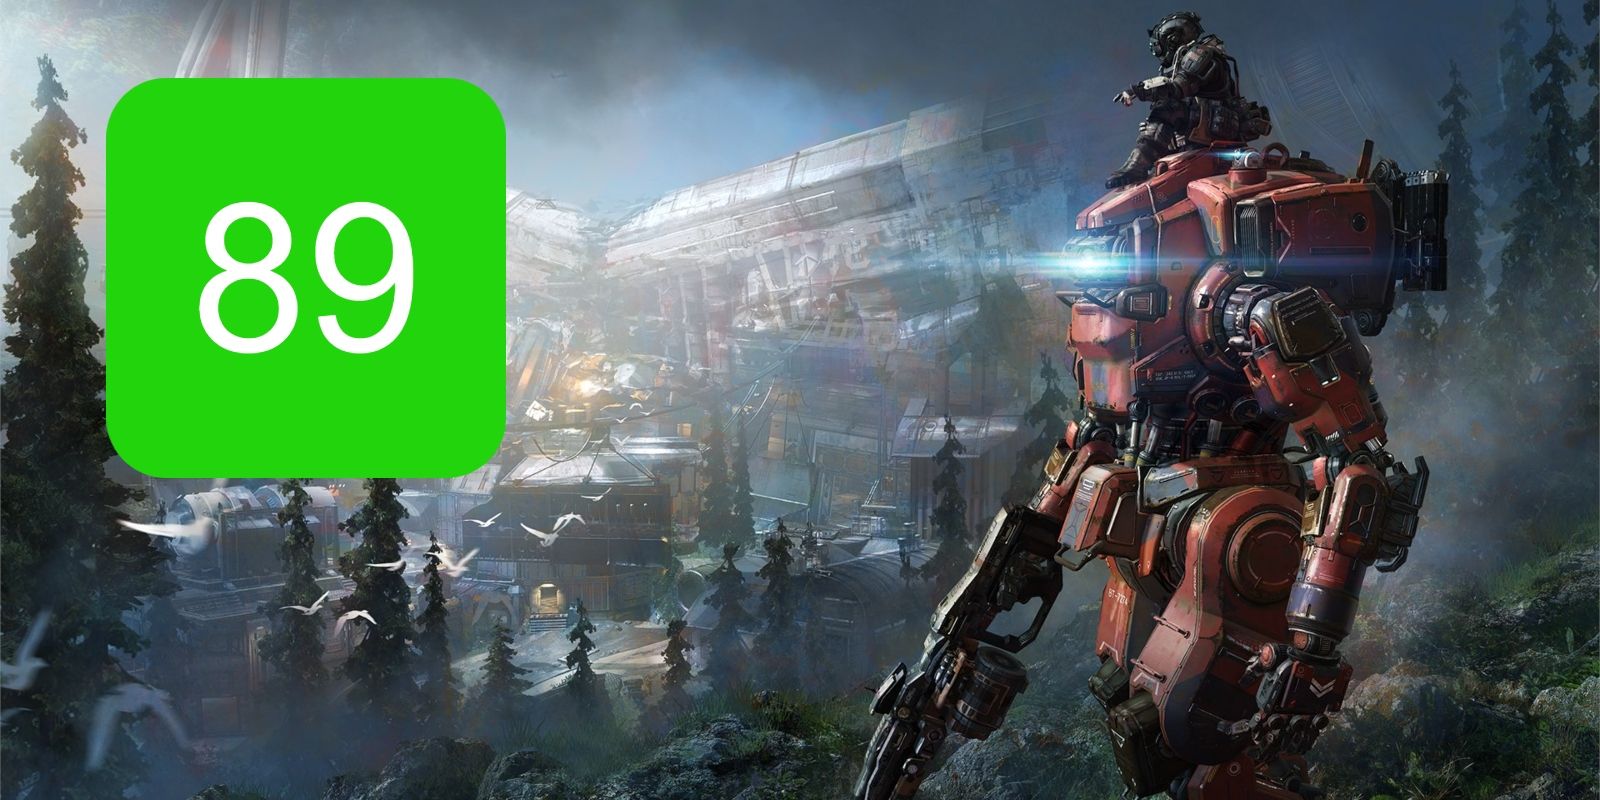 The Xbox One Metascore for Titanfall 2